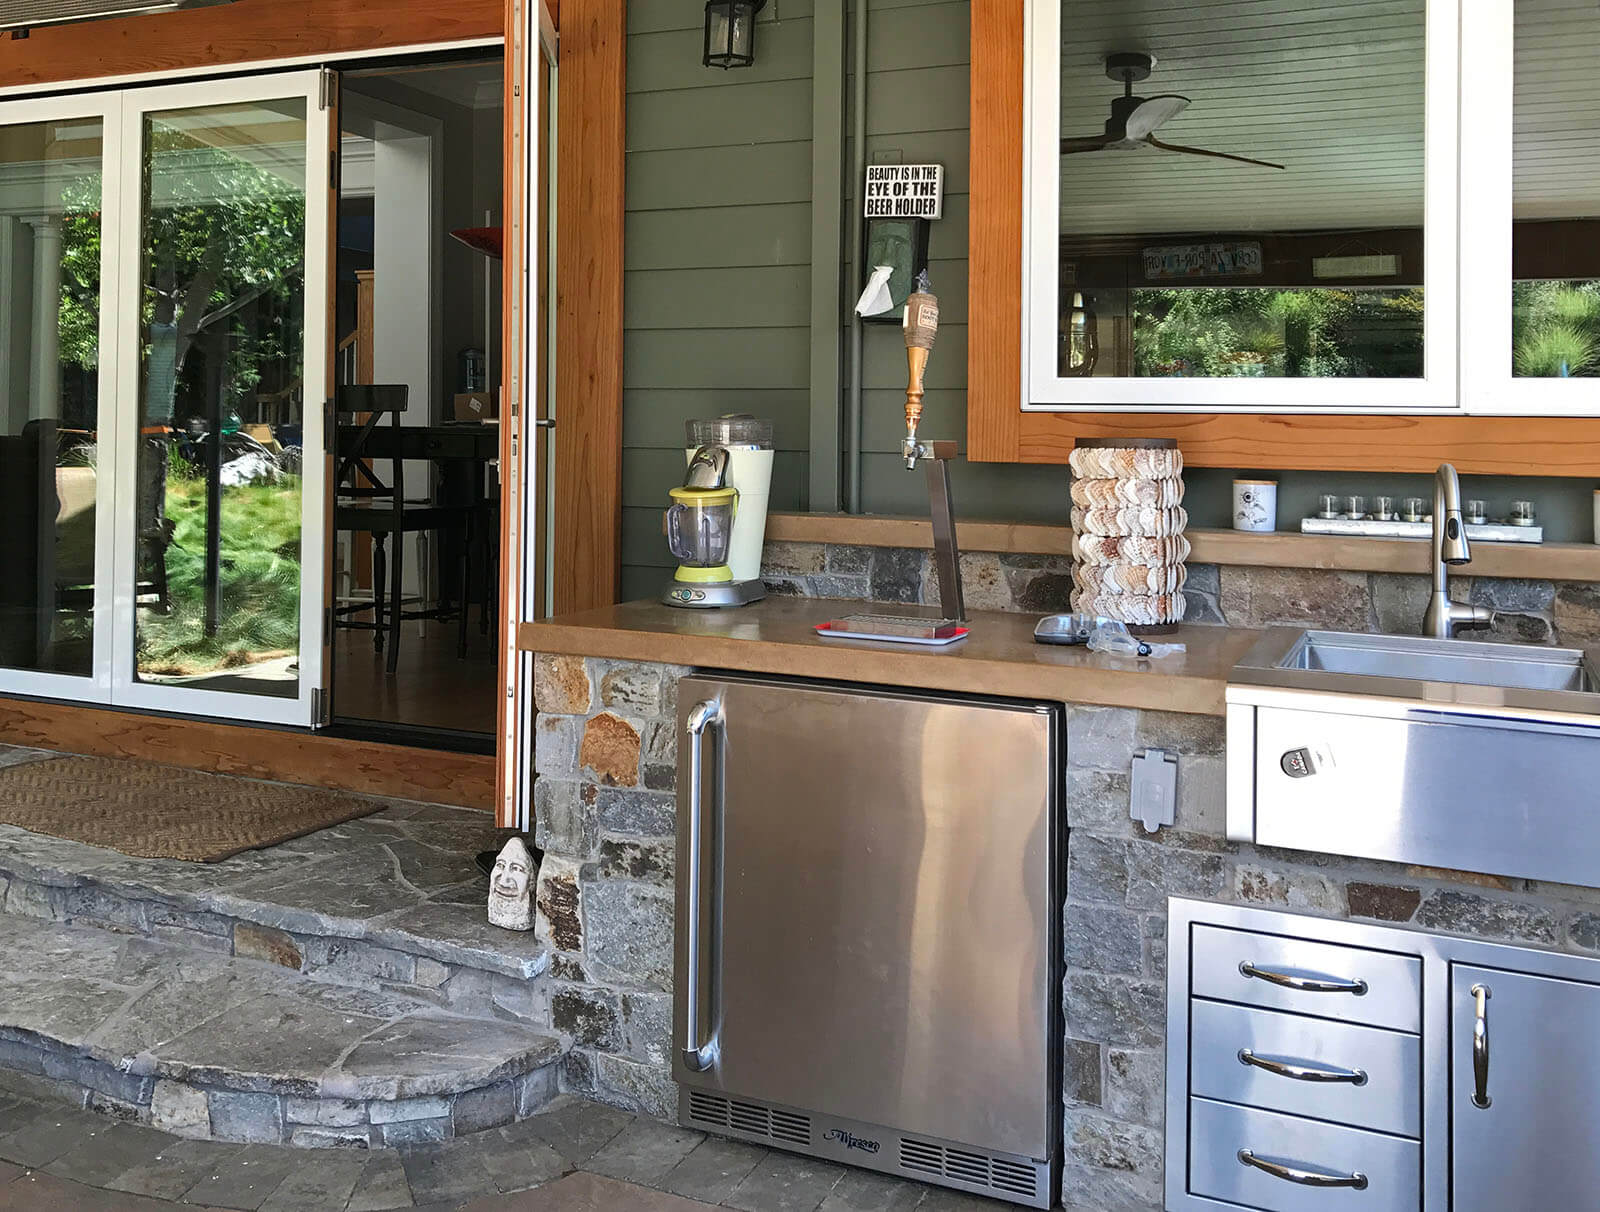 Outdoor kitchen with stainless steel fridge, beer tap, sink and storage, concrete counters and stone detailing